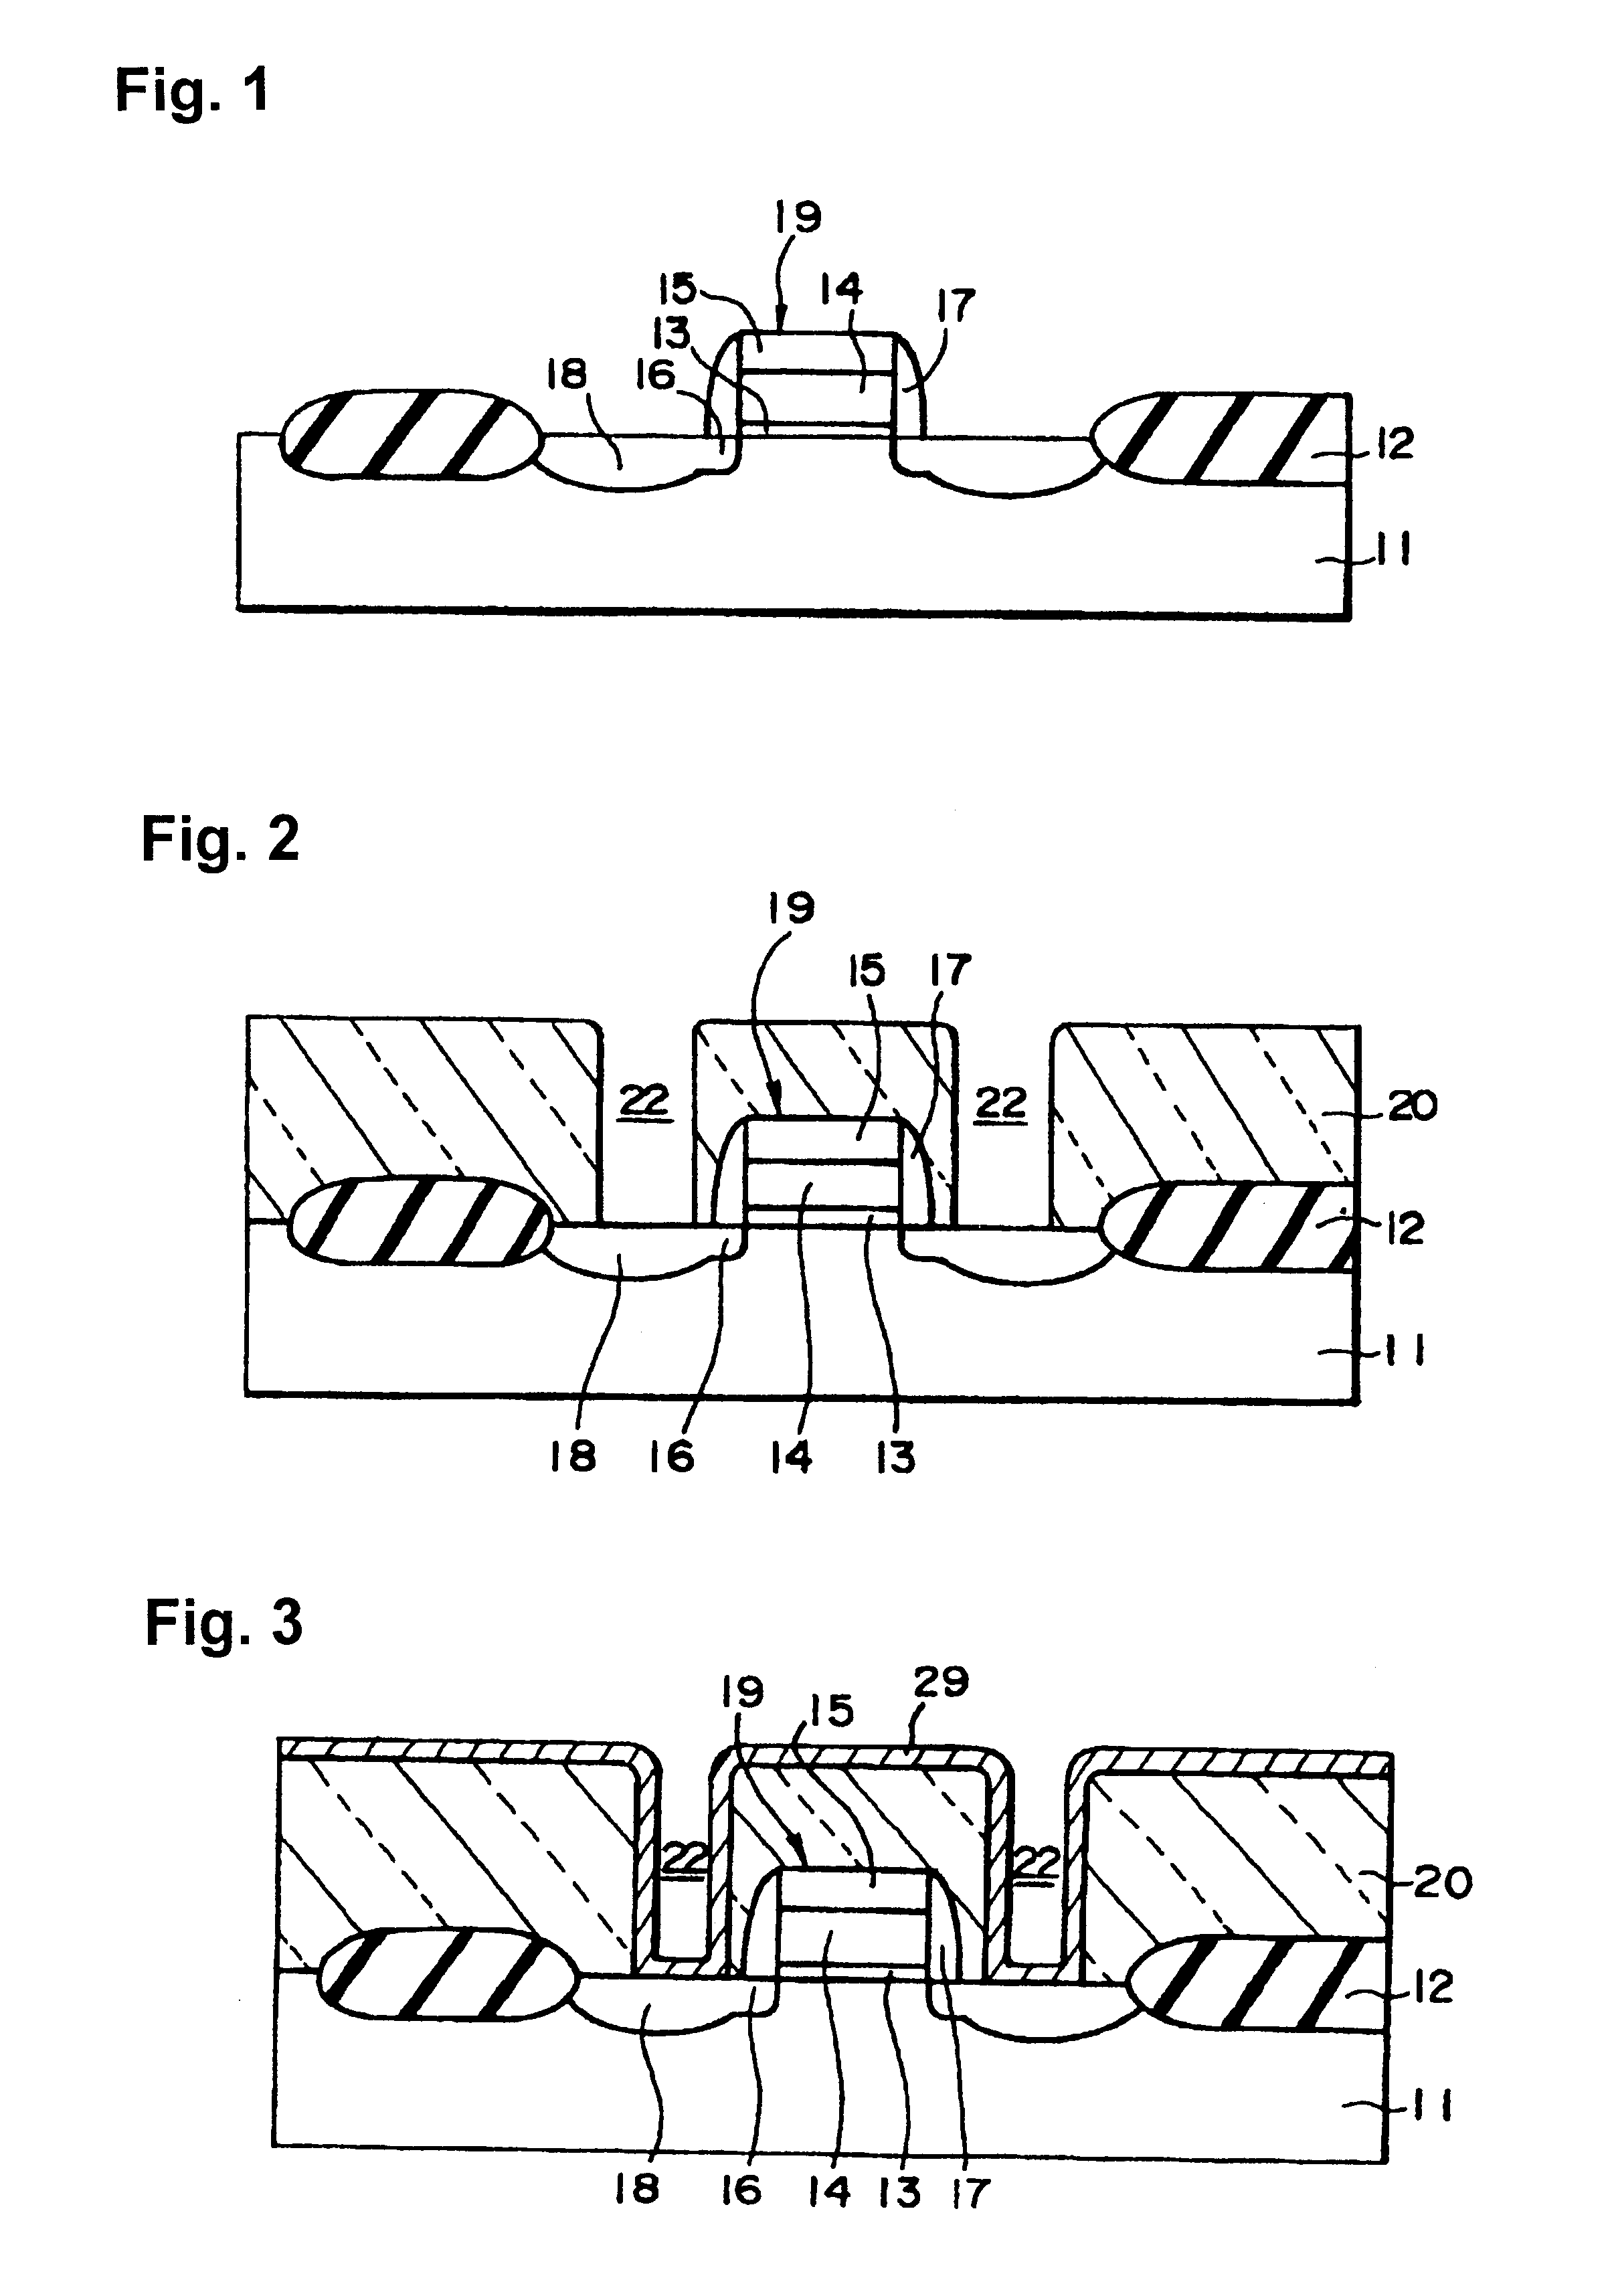 Method for manufacturing semiconductor devices